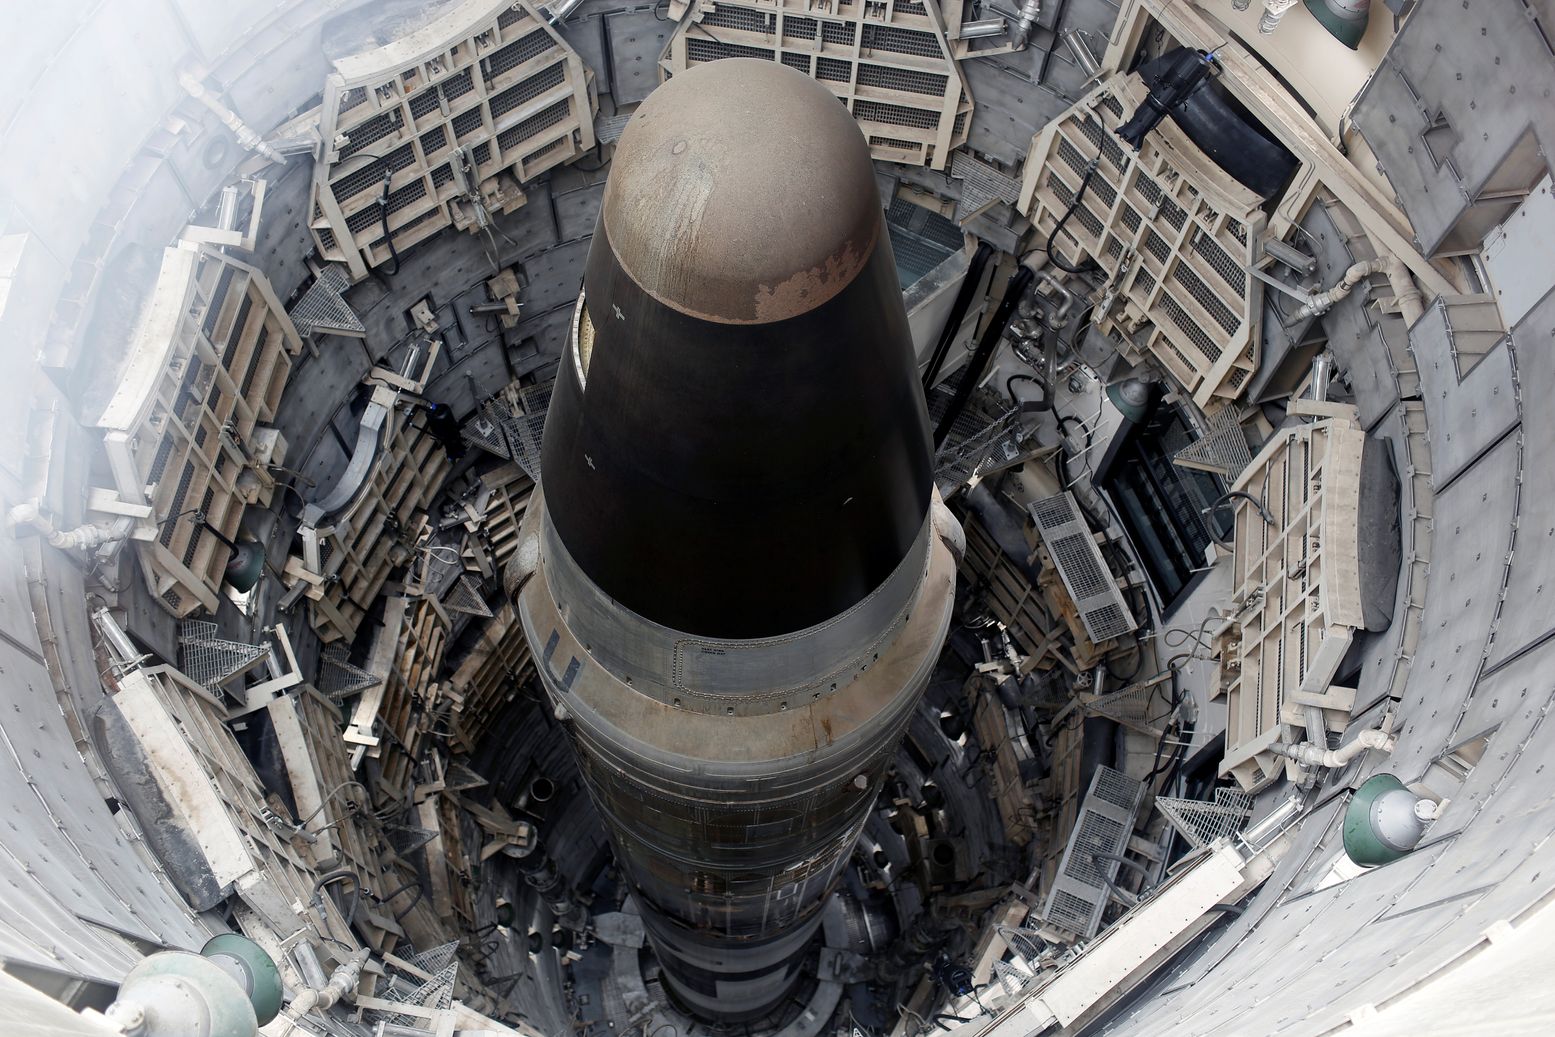 This Is How an Accidental Nuclear World War III Could Begin The